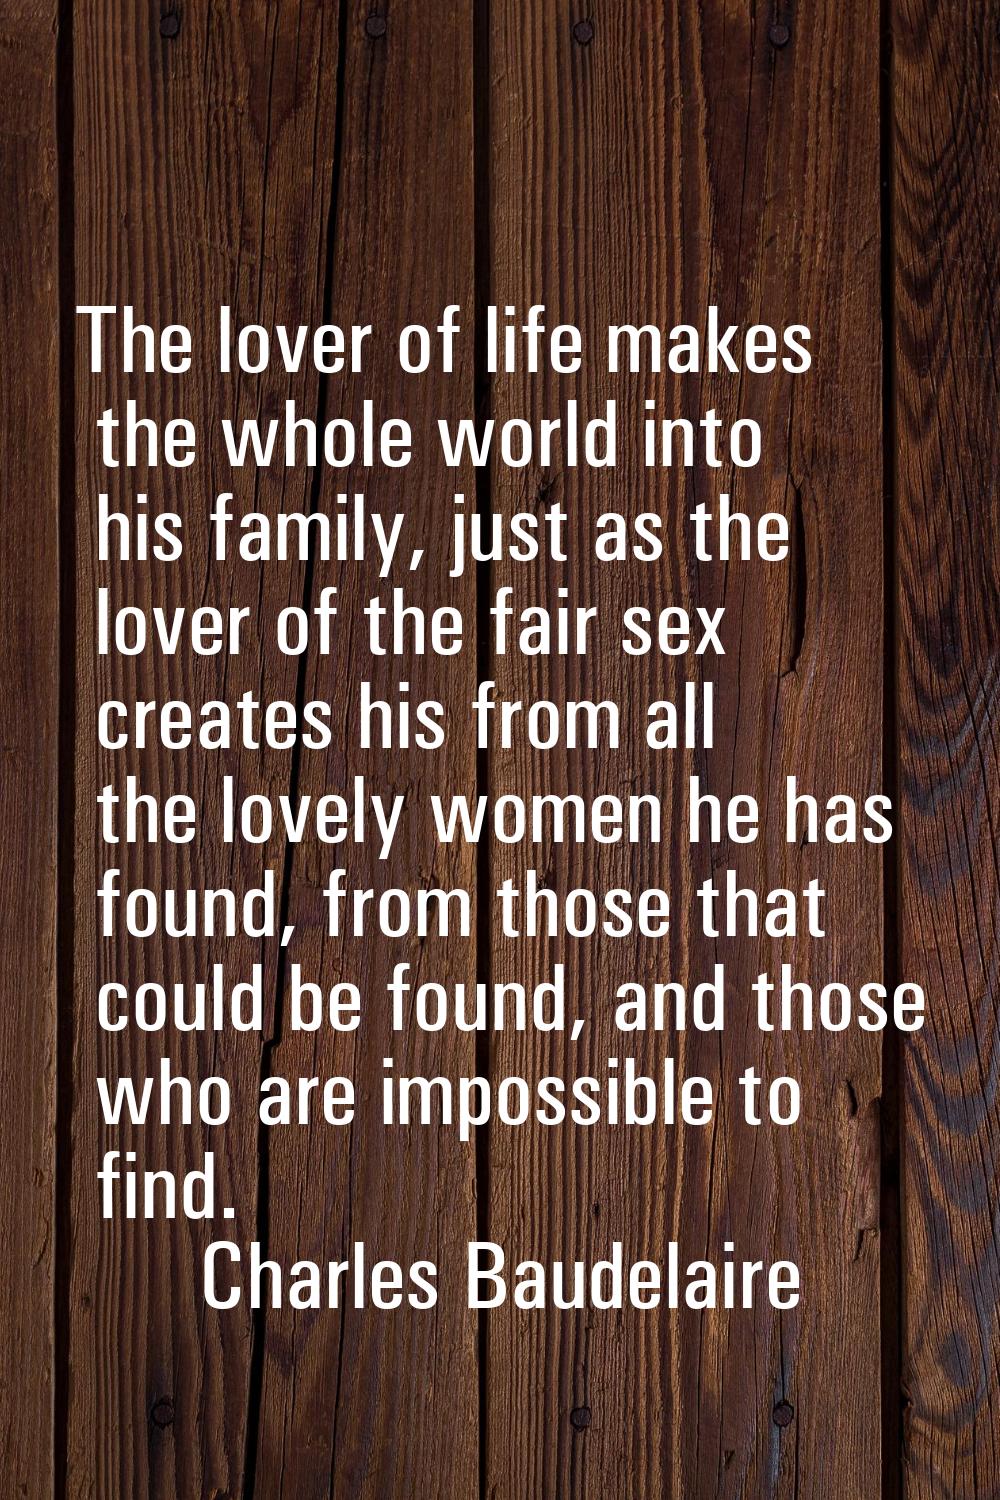 The lover of life makes the whole world into his family, just as the lover of the fair sex creates 